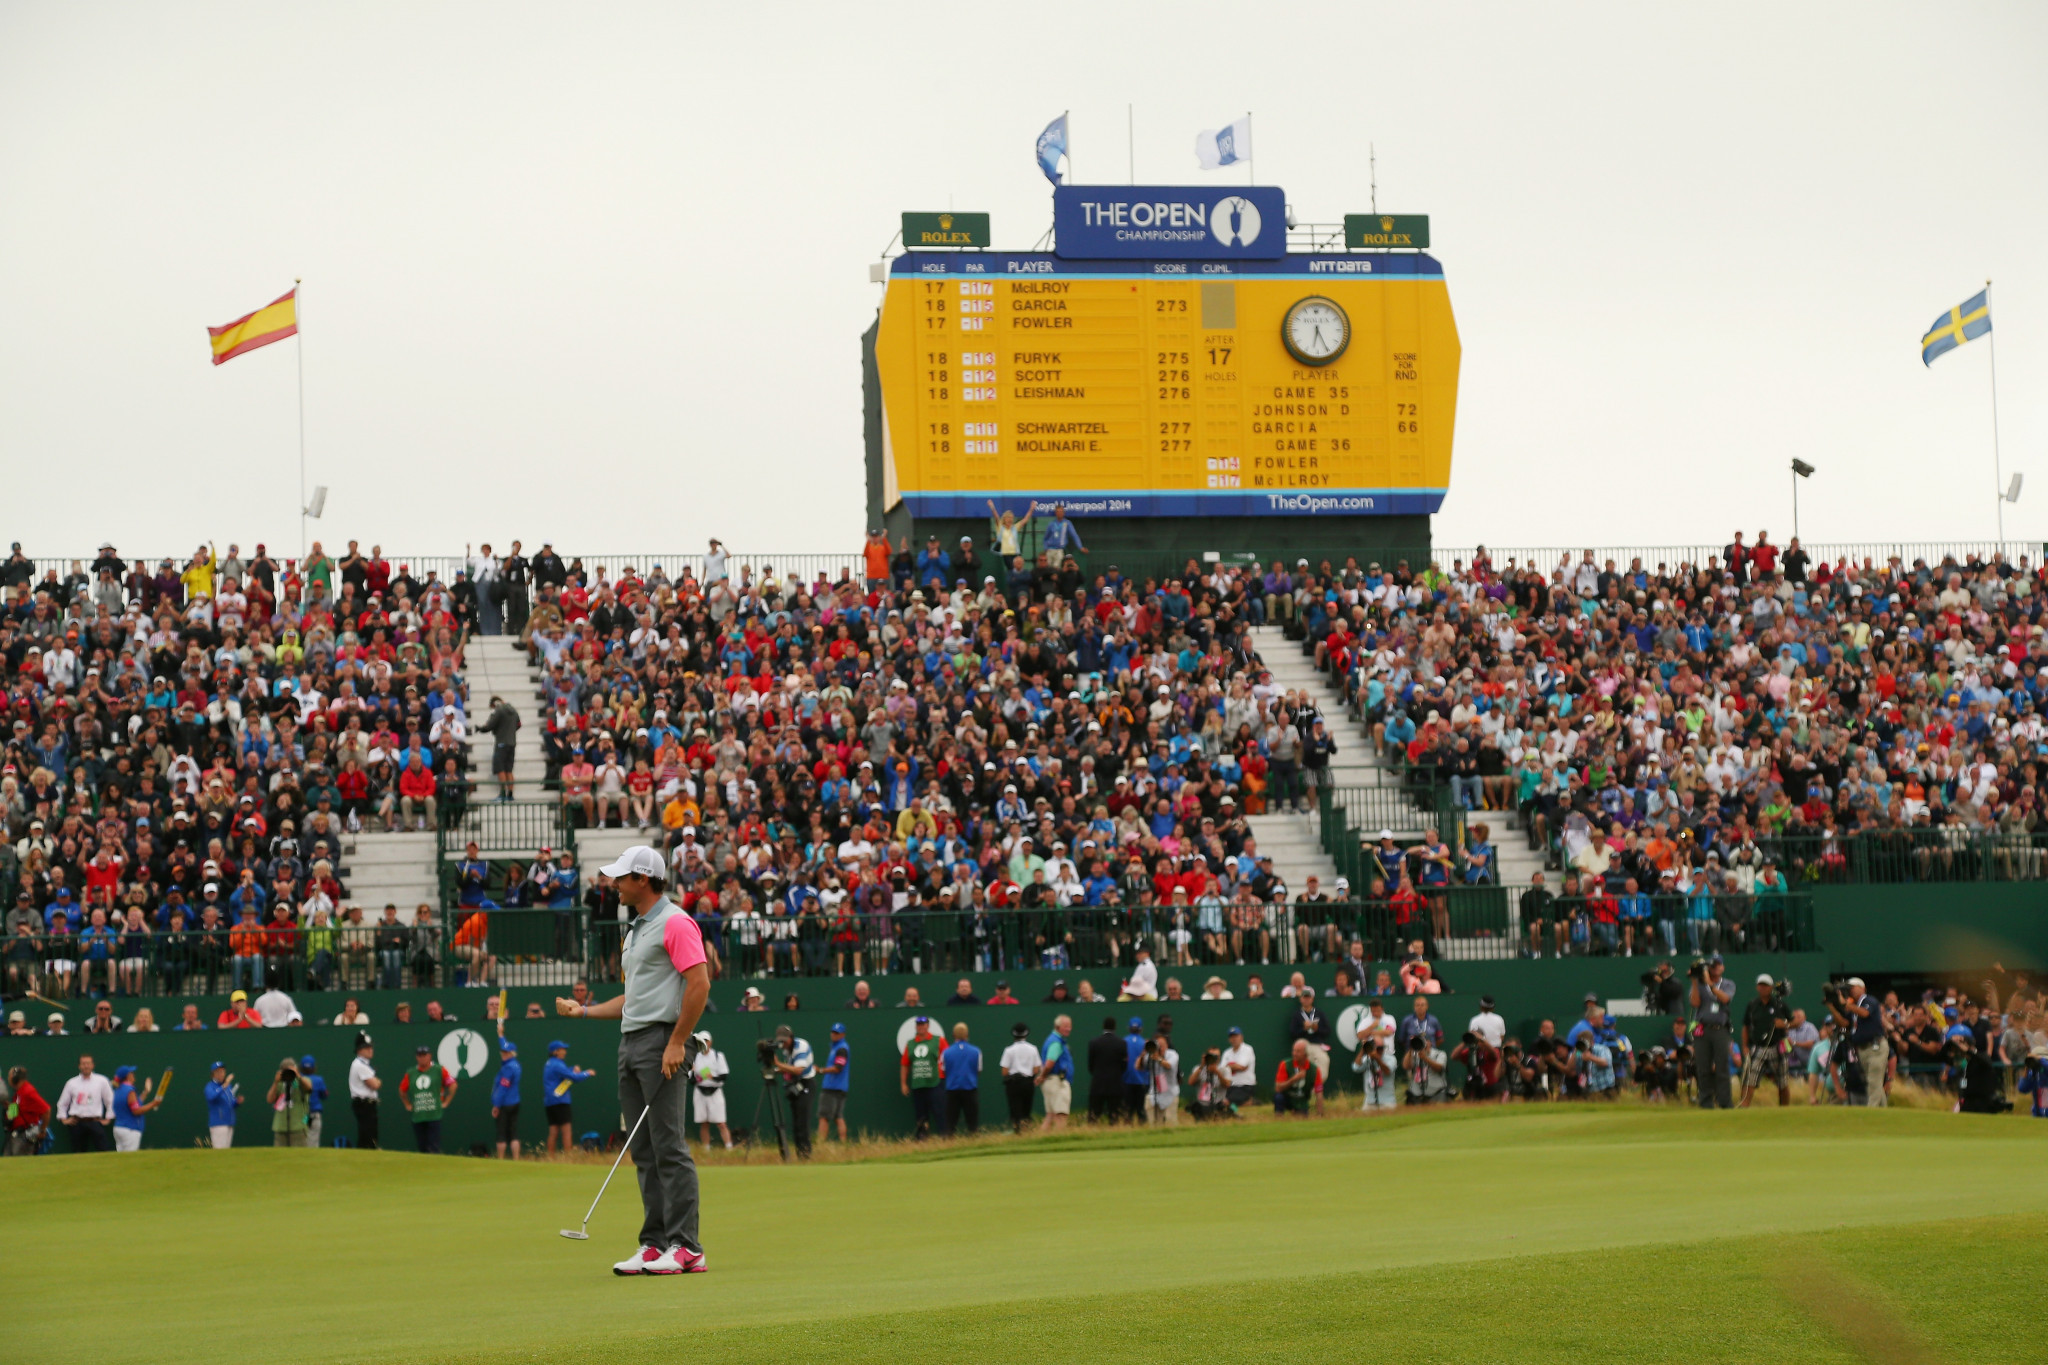 Royal Liverpool to host The Open again in 2022